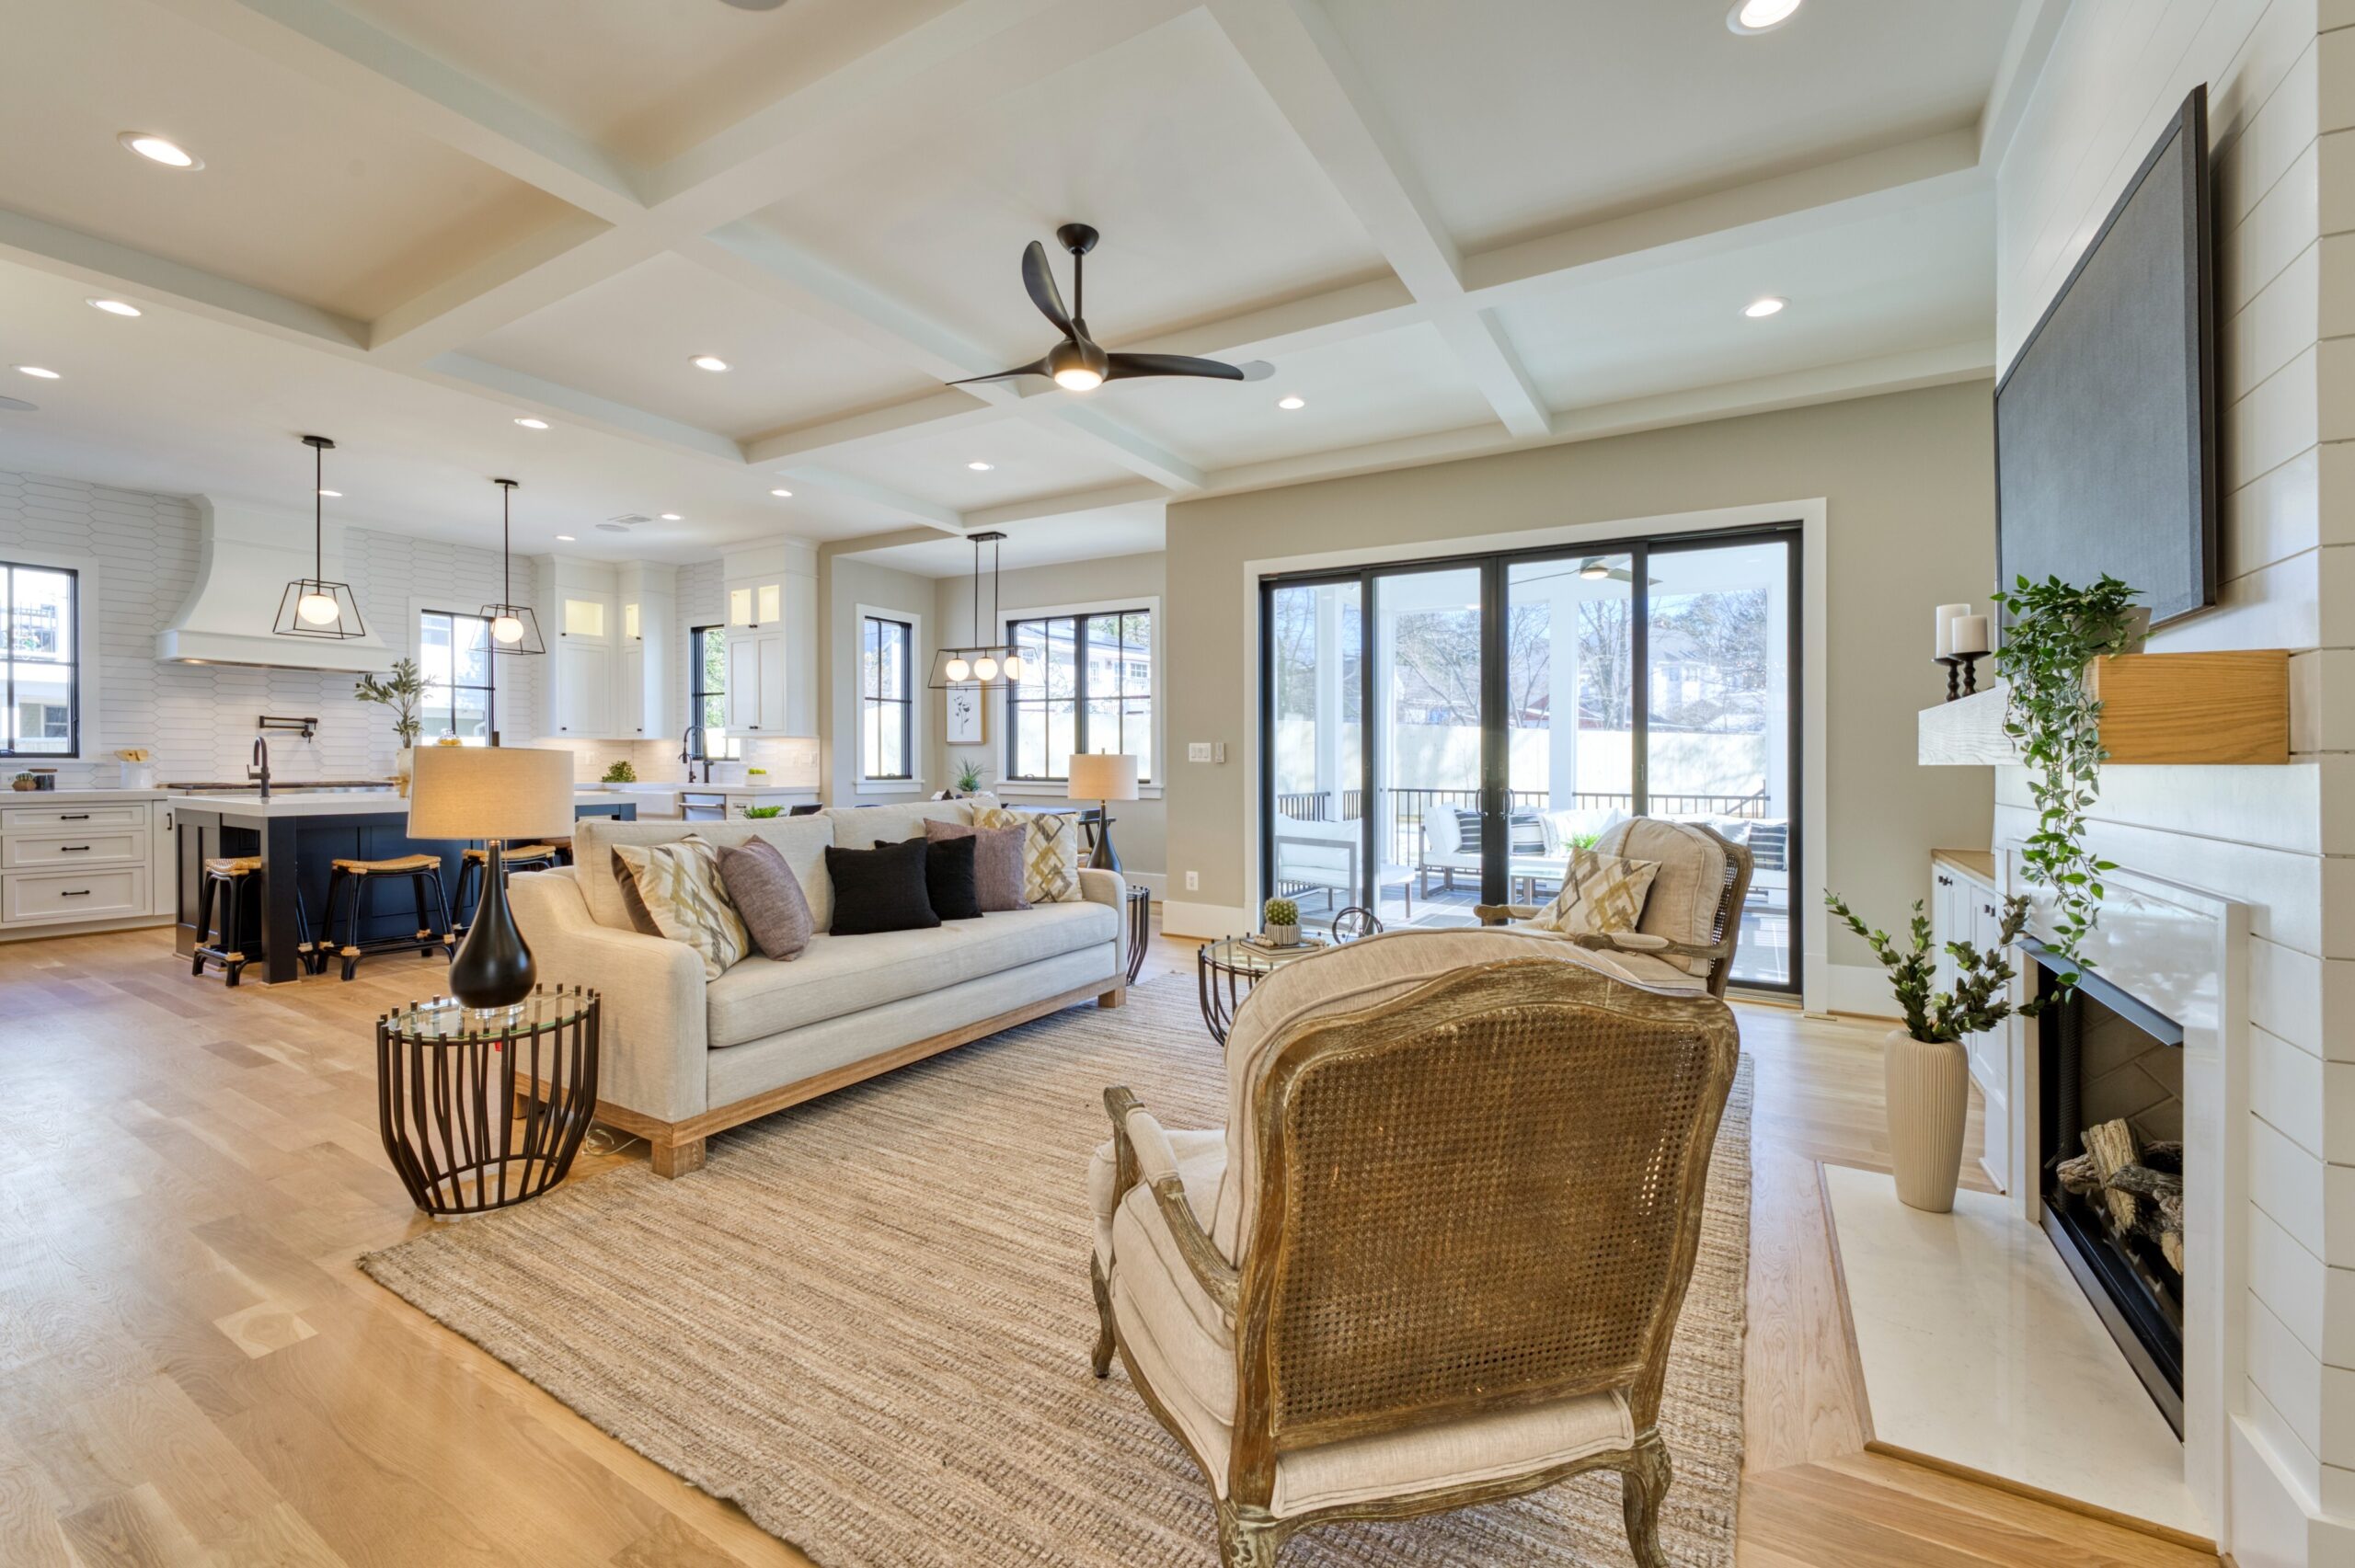 Professional interior photo of 1624 Dempsey St, McLean, VA - showing the main living space with coffered ceiling over the living room with the kitchen in the background